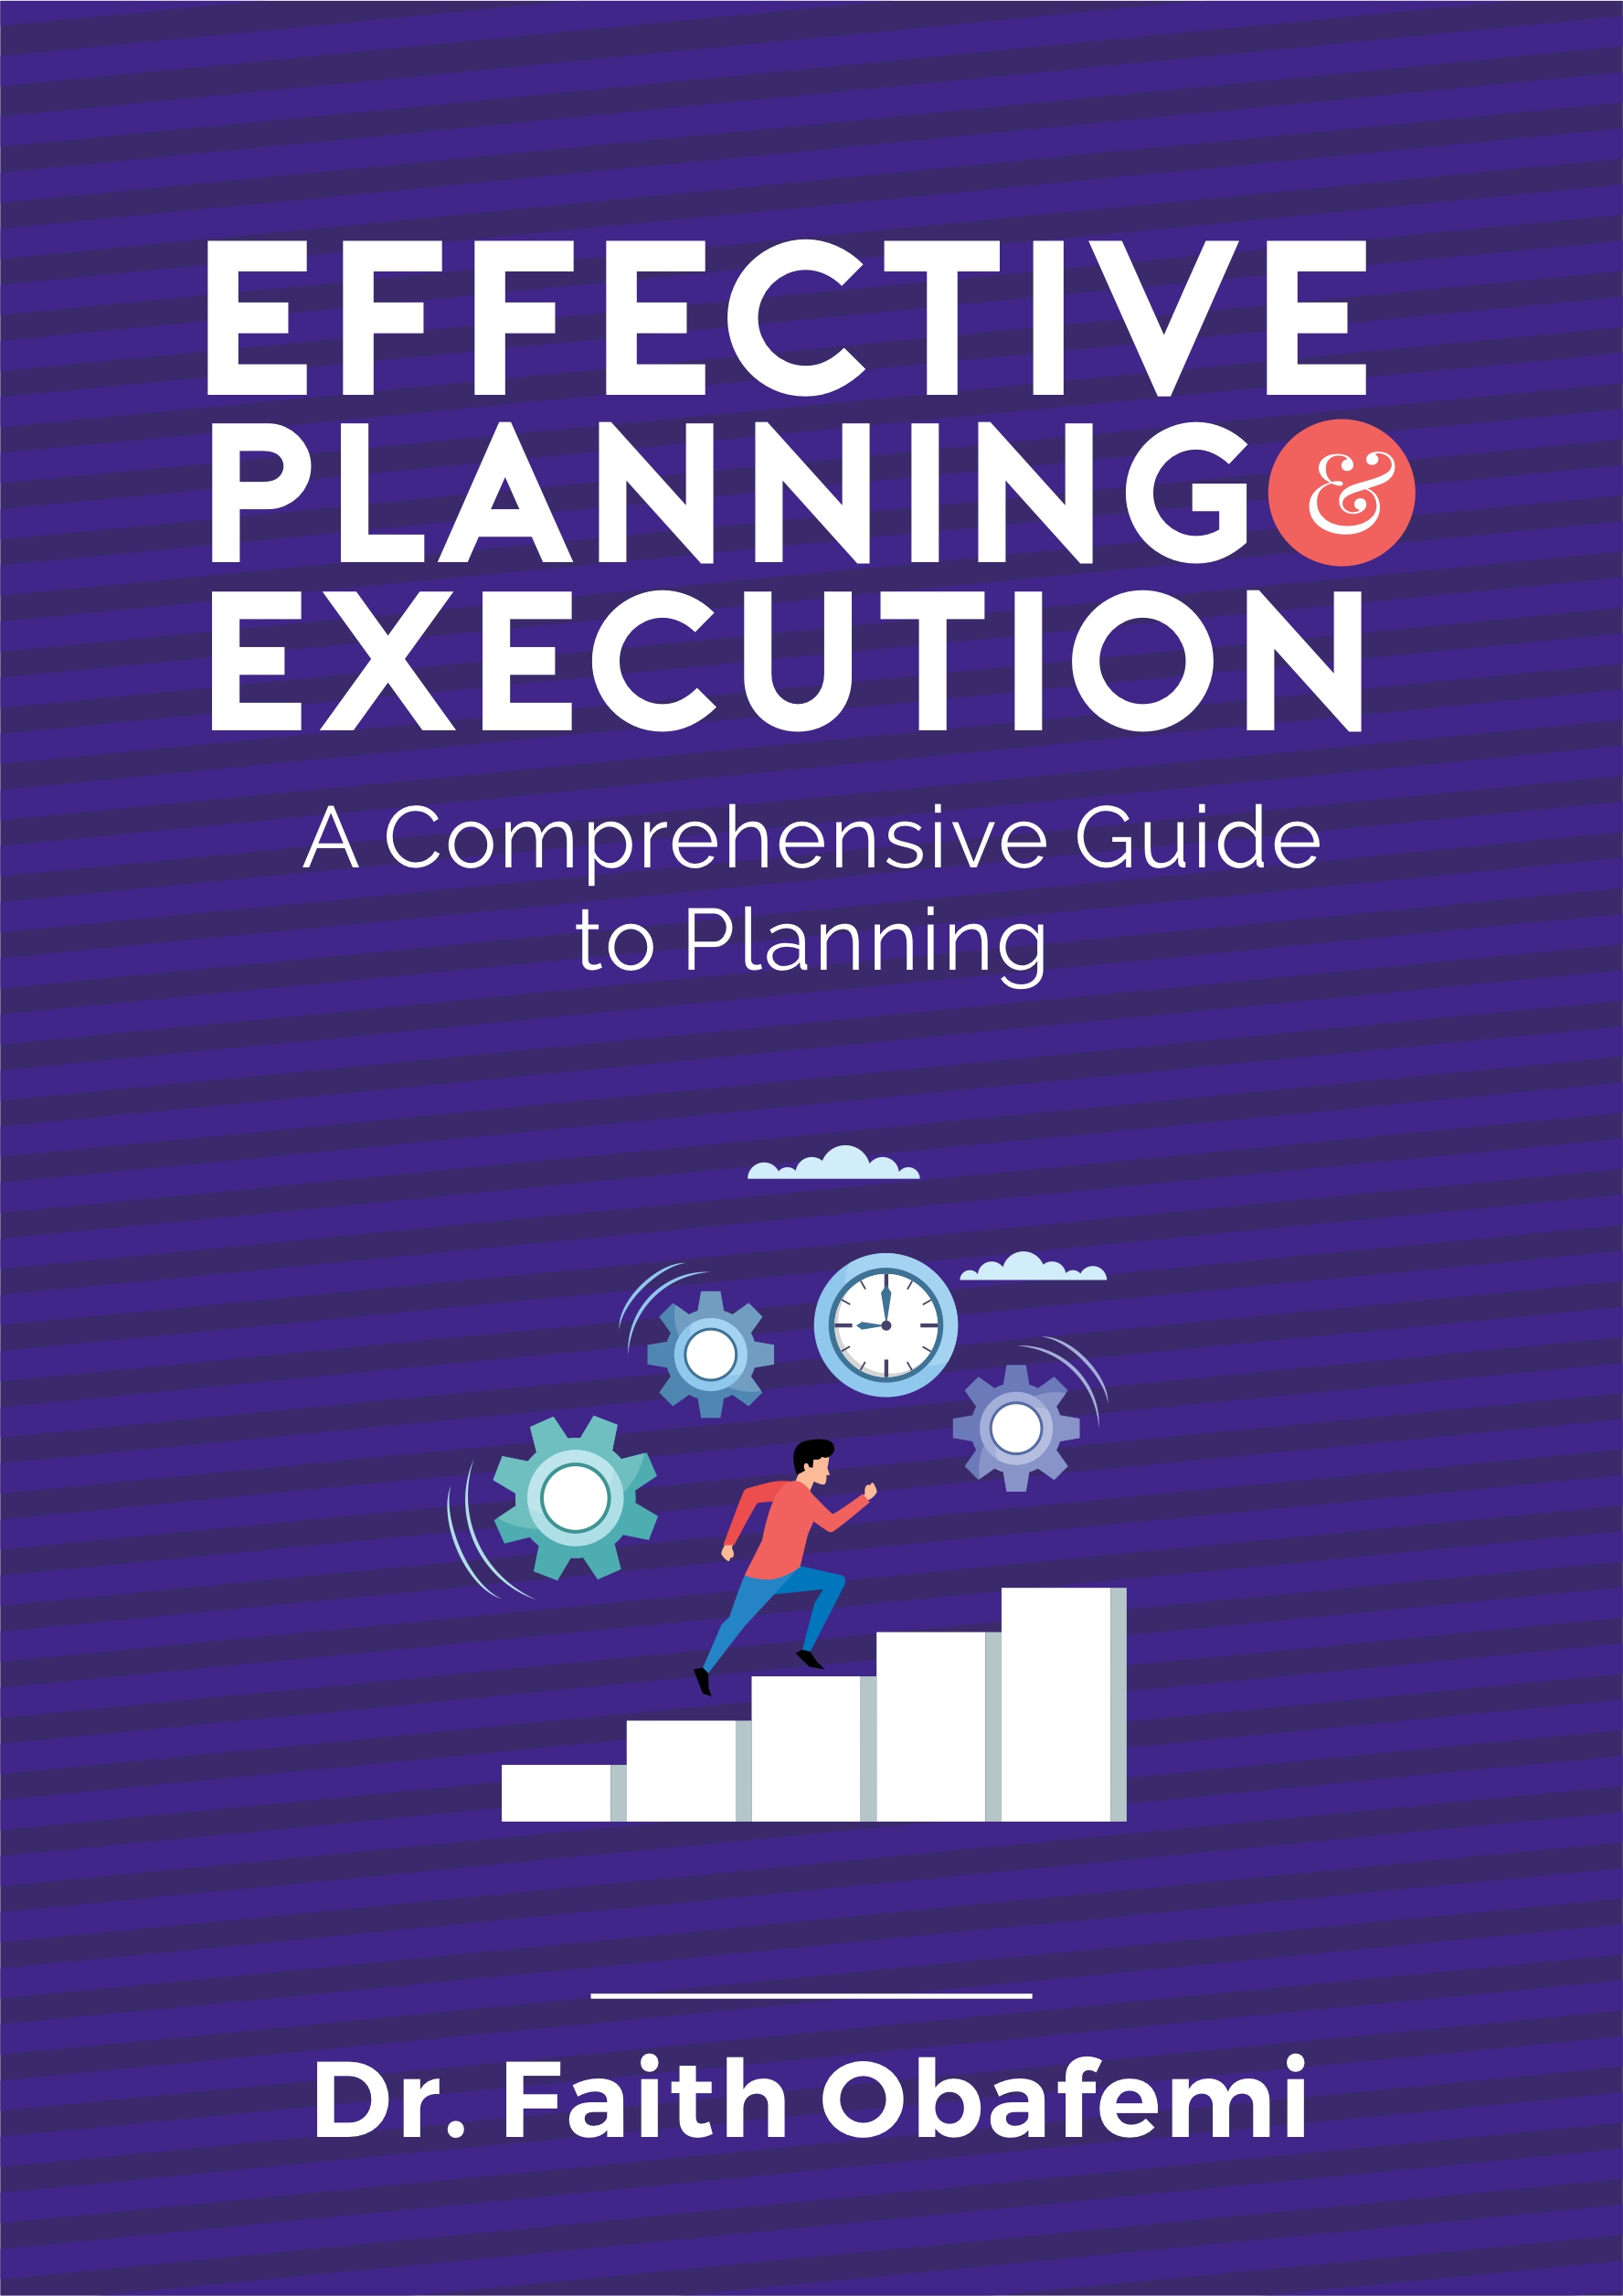 Effective-Planning-and-Execution--A-Comprehensive-Guide-to-Planning